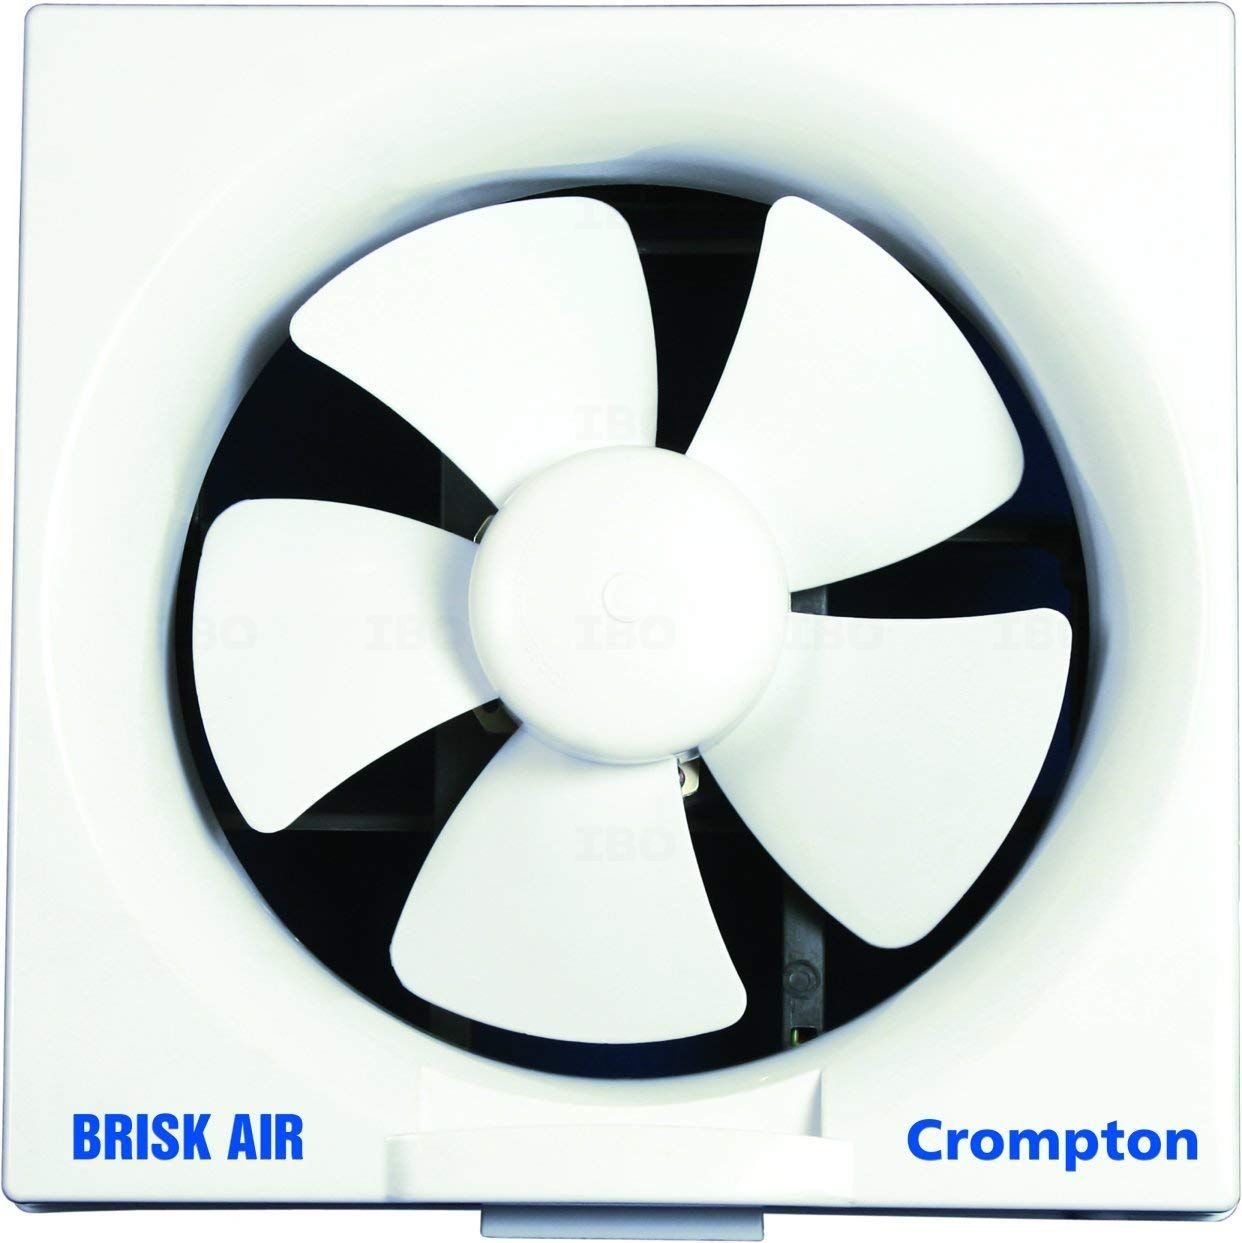 Crompton Greaves stocks: Buy Crompton Greaves Consumer Electricals, target  price Rs 400: HDFC Securities - The Economic Times